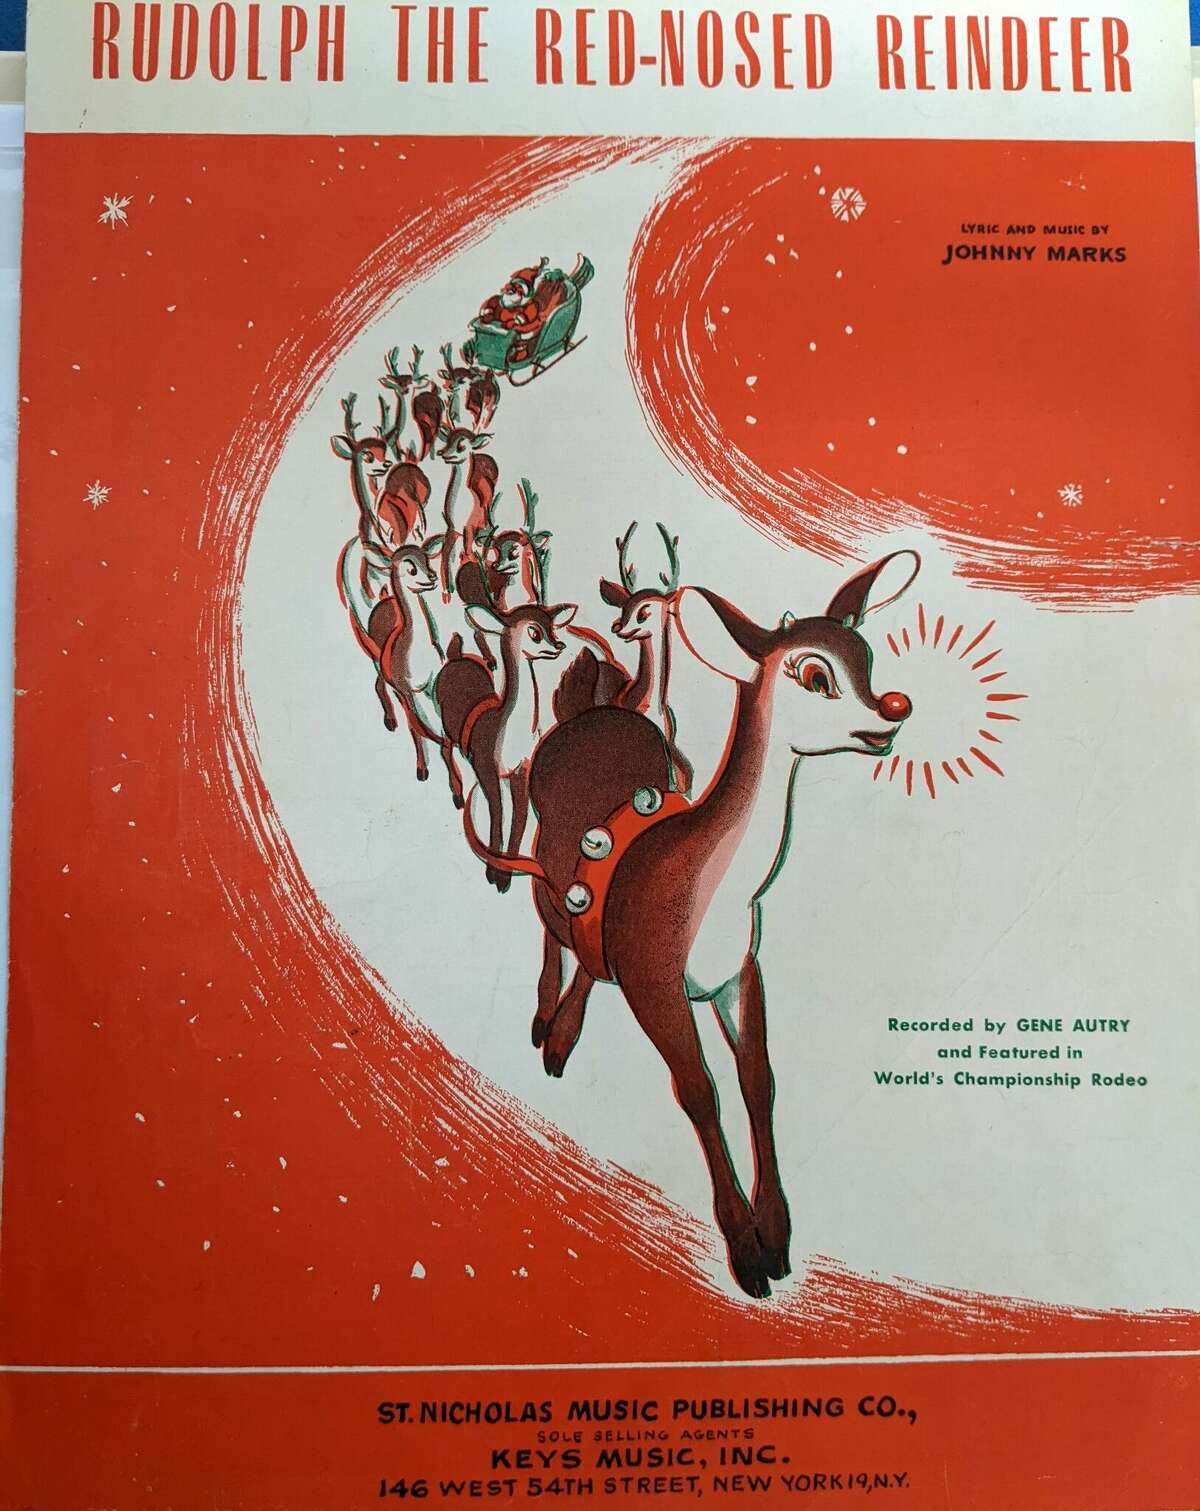 When Robert May wrote the little Christmas book “Rudolph the Red-Nosed Reindeer," he didn’t know that it would become a Christmas classic.  A few years later, Johnny Marks wrote the song “Rudolph the Red-Nosed Reindeer,” which has also become a staple of the Christmas season.  